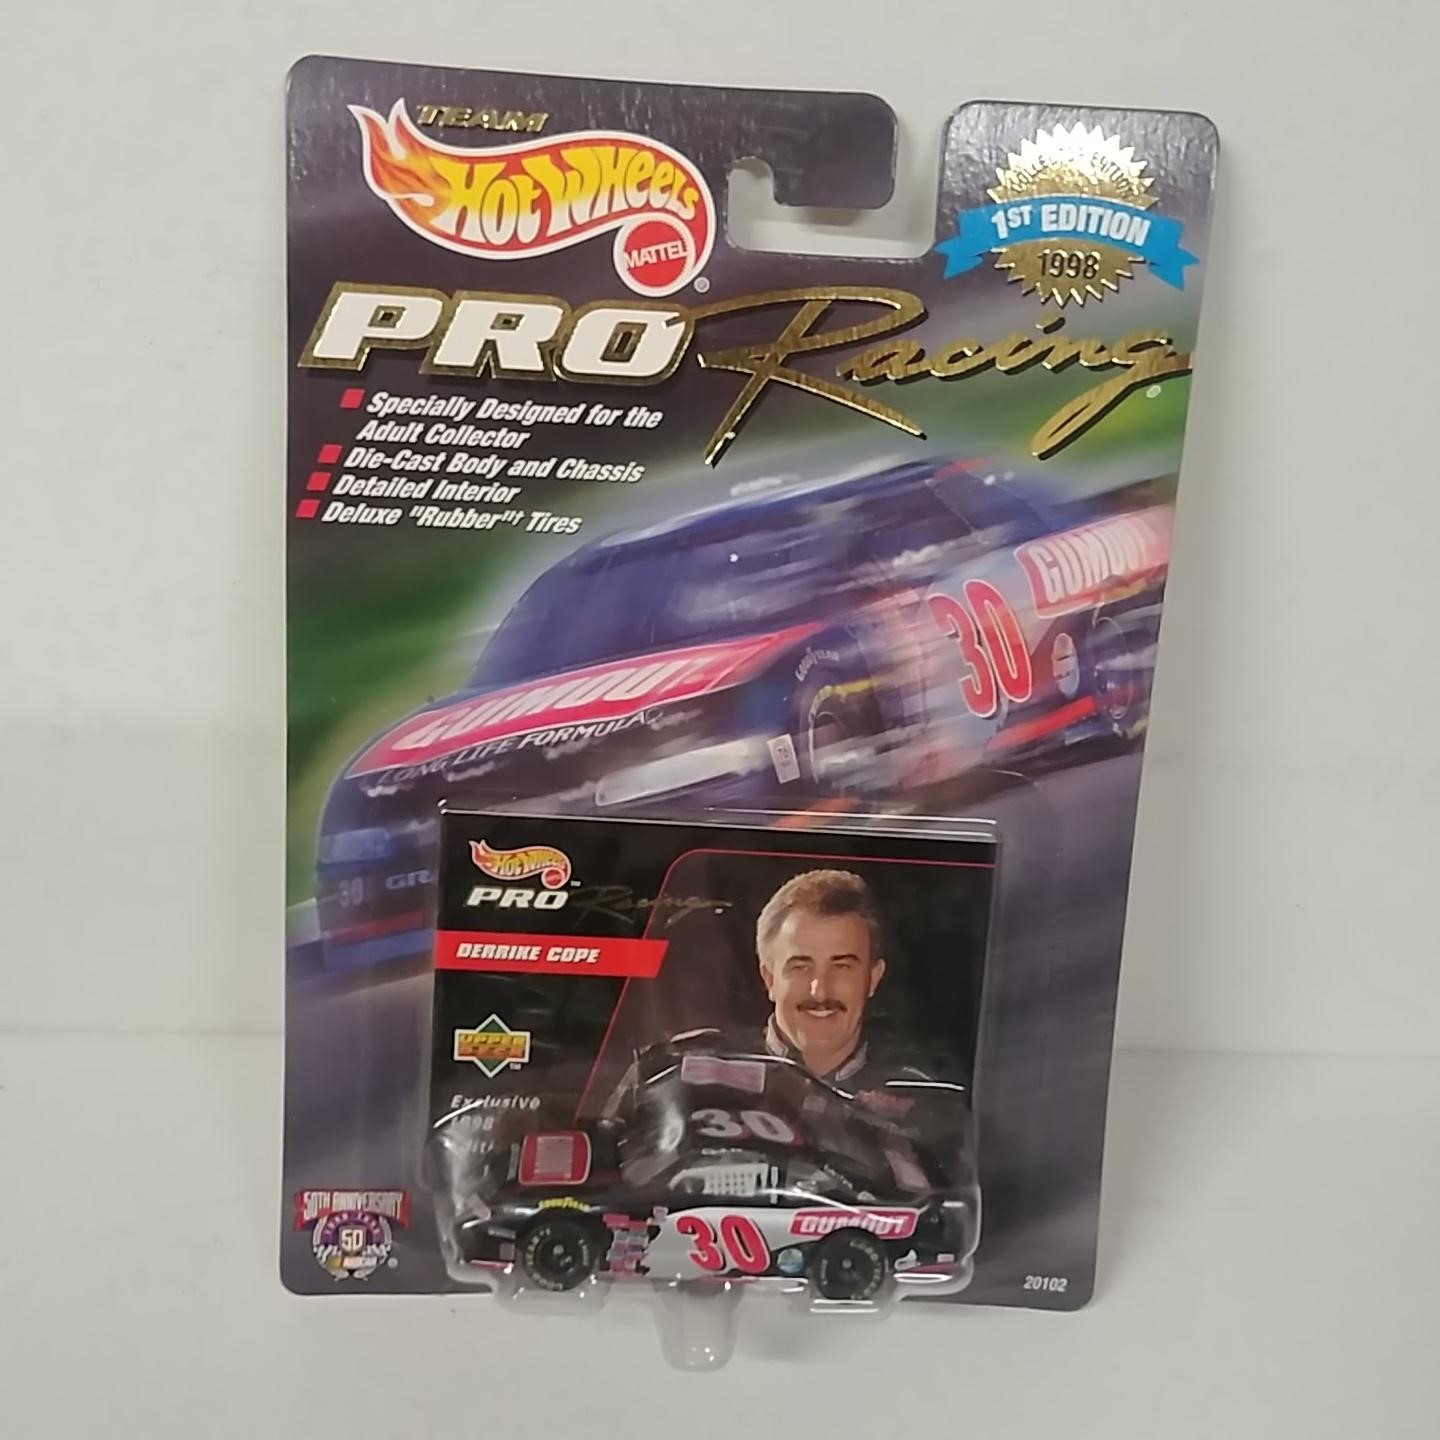 ..1998 Derrick Cope 1/64th Gum-Out car in blister pac